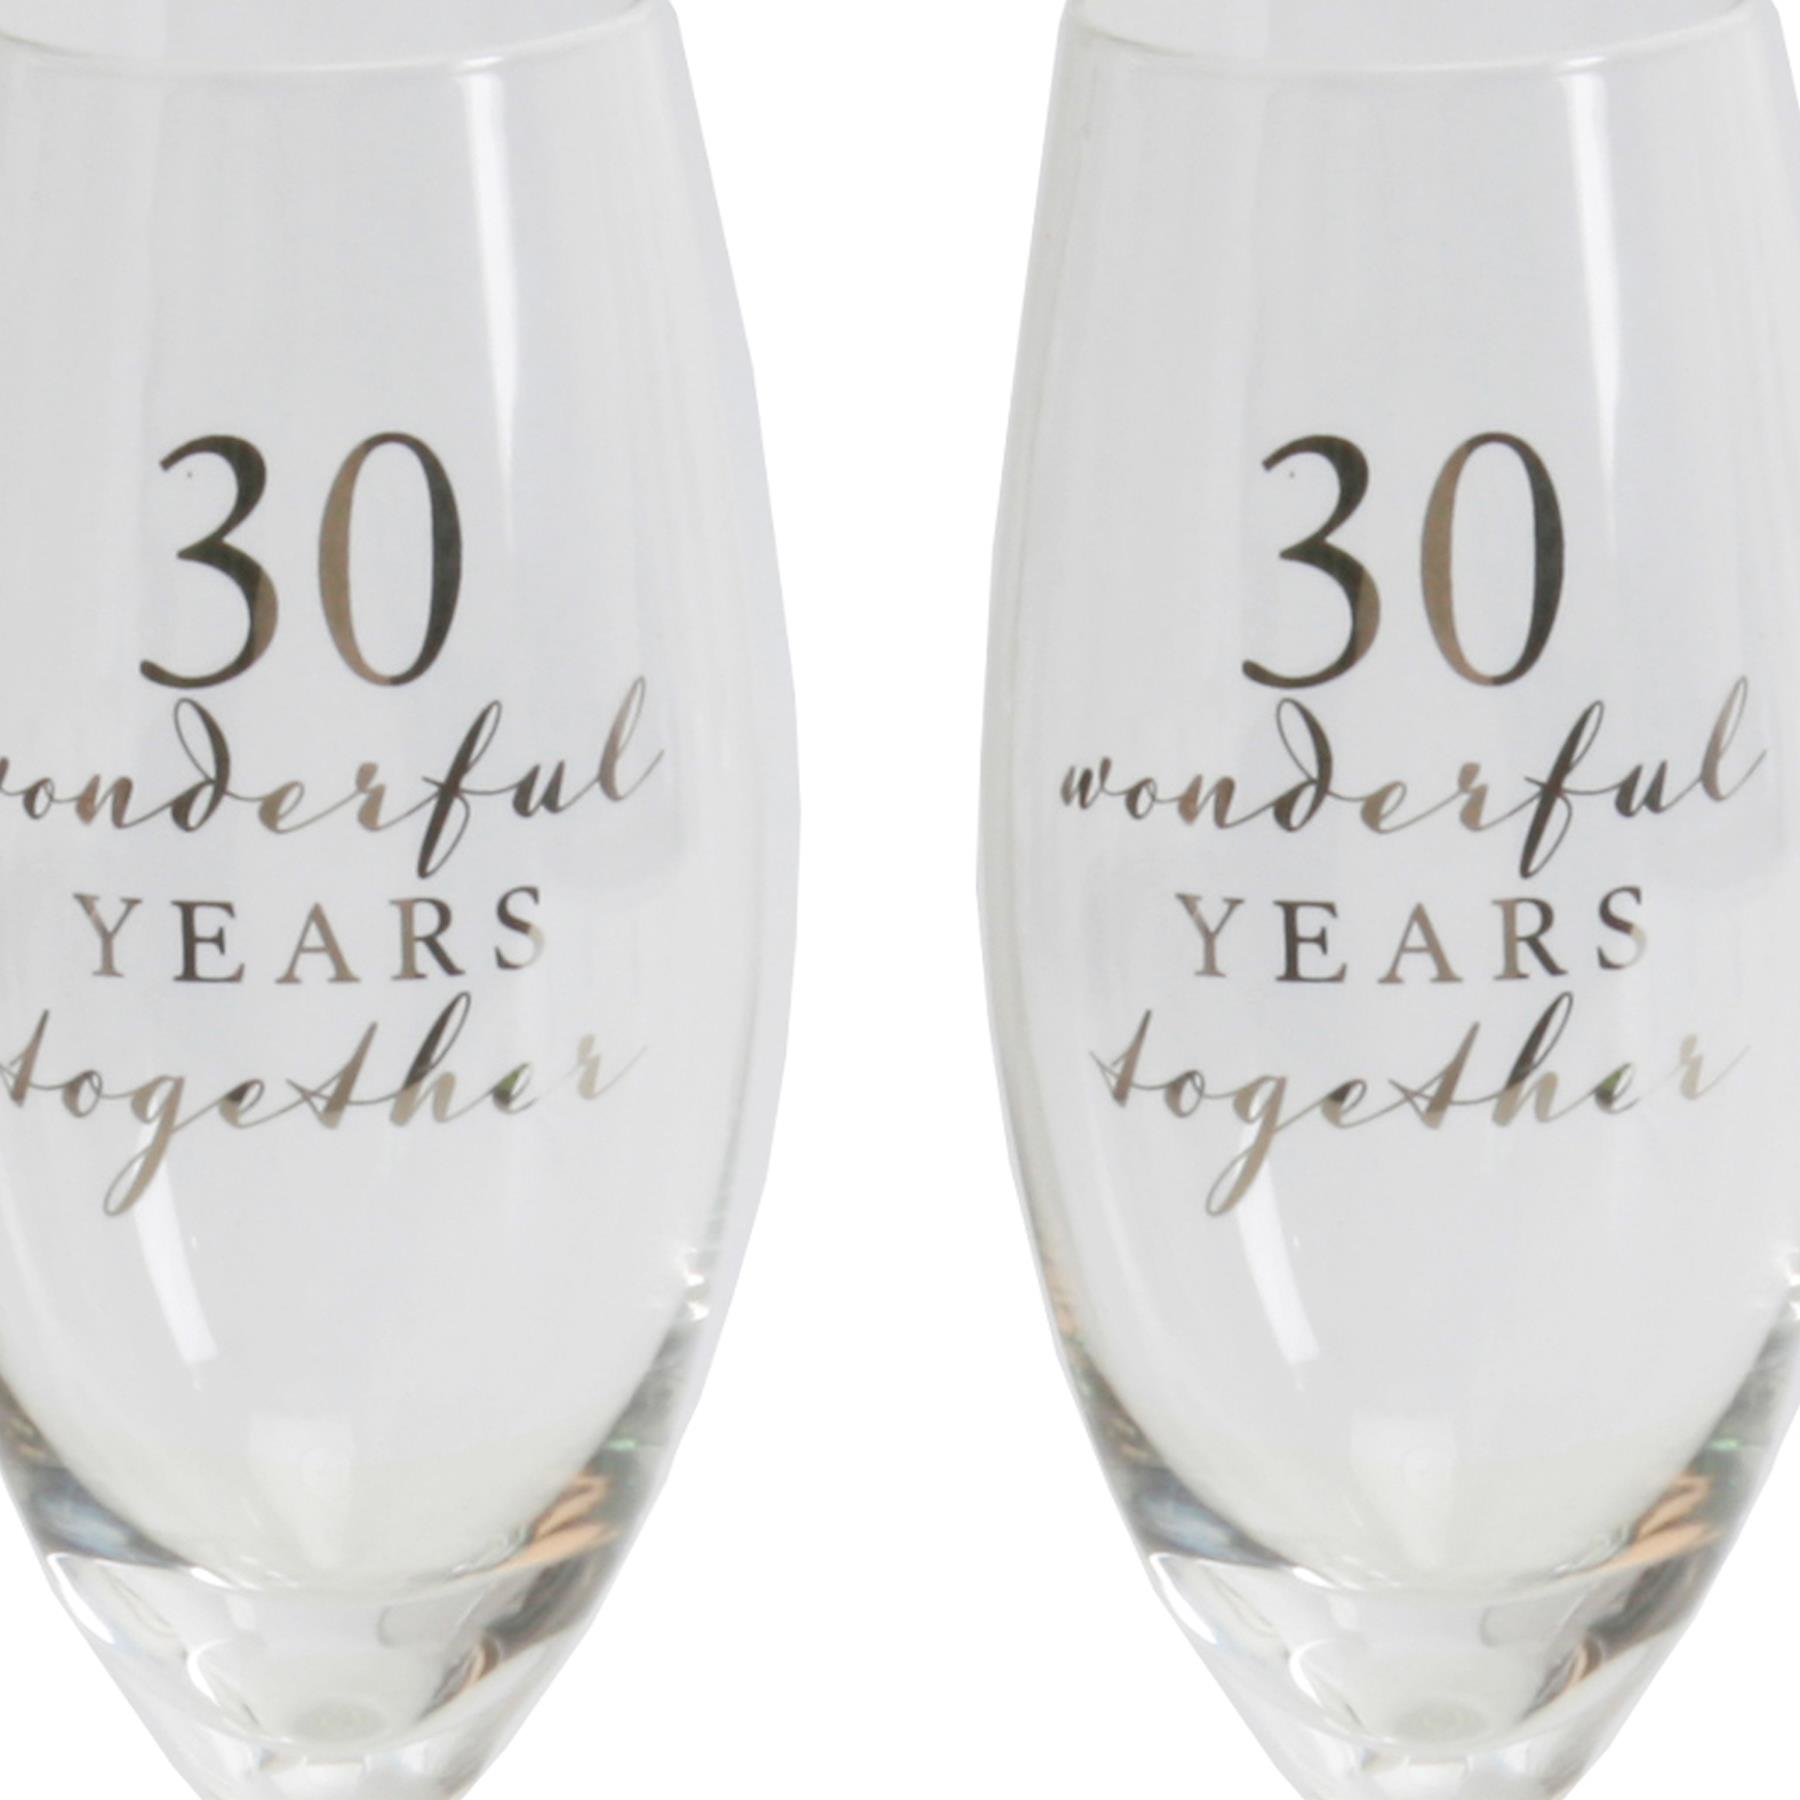 Amore Set of 2 Gift Boxed Champagne Flutes - 30th Anniversary